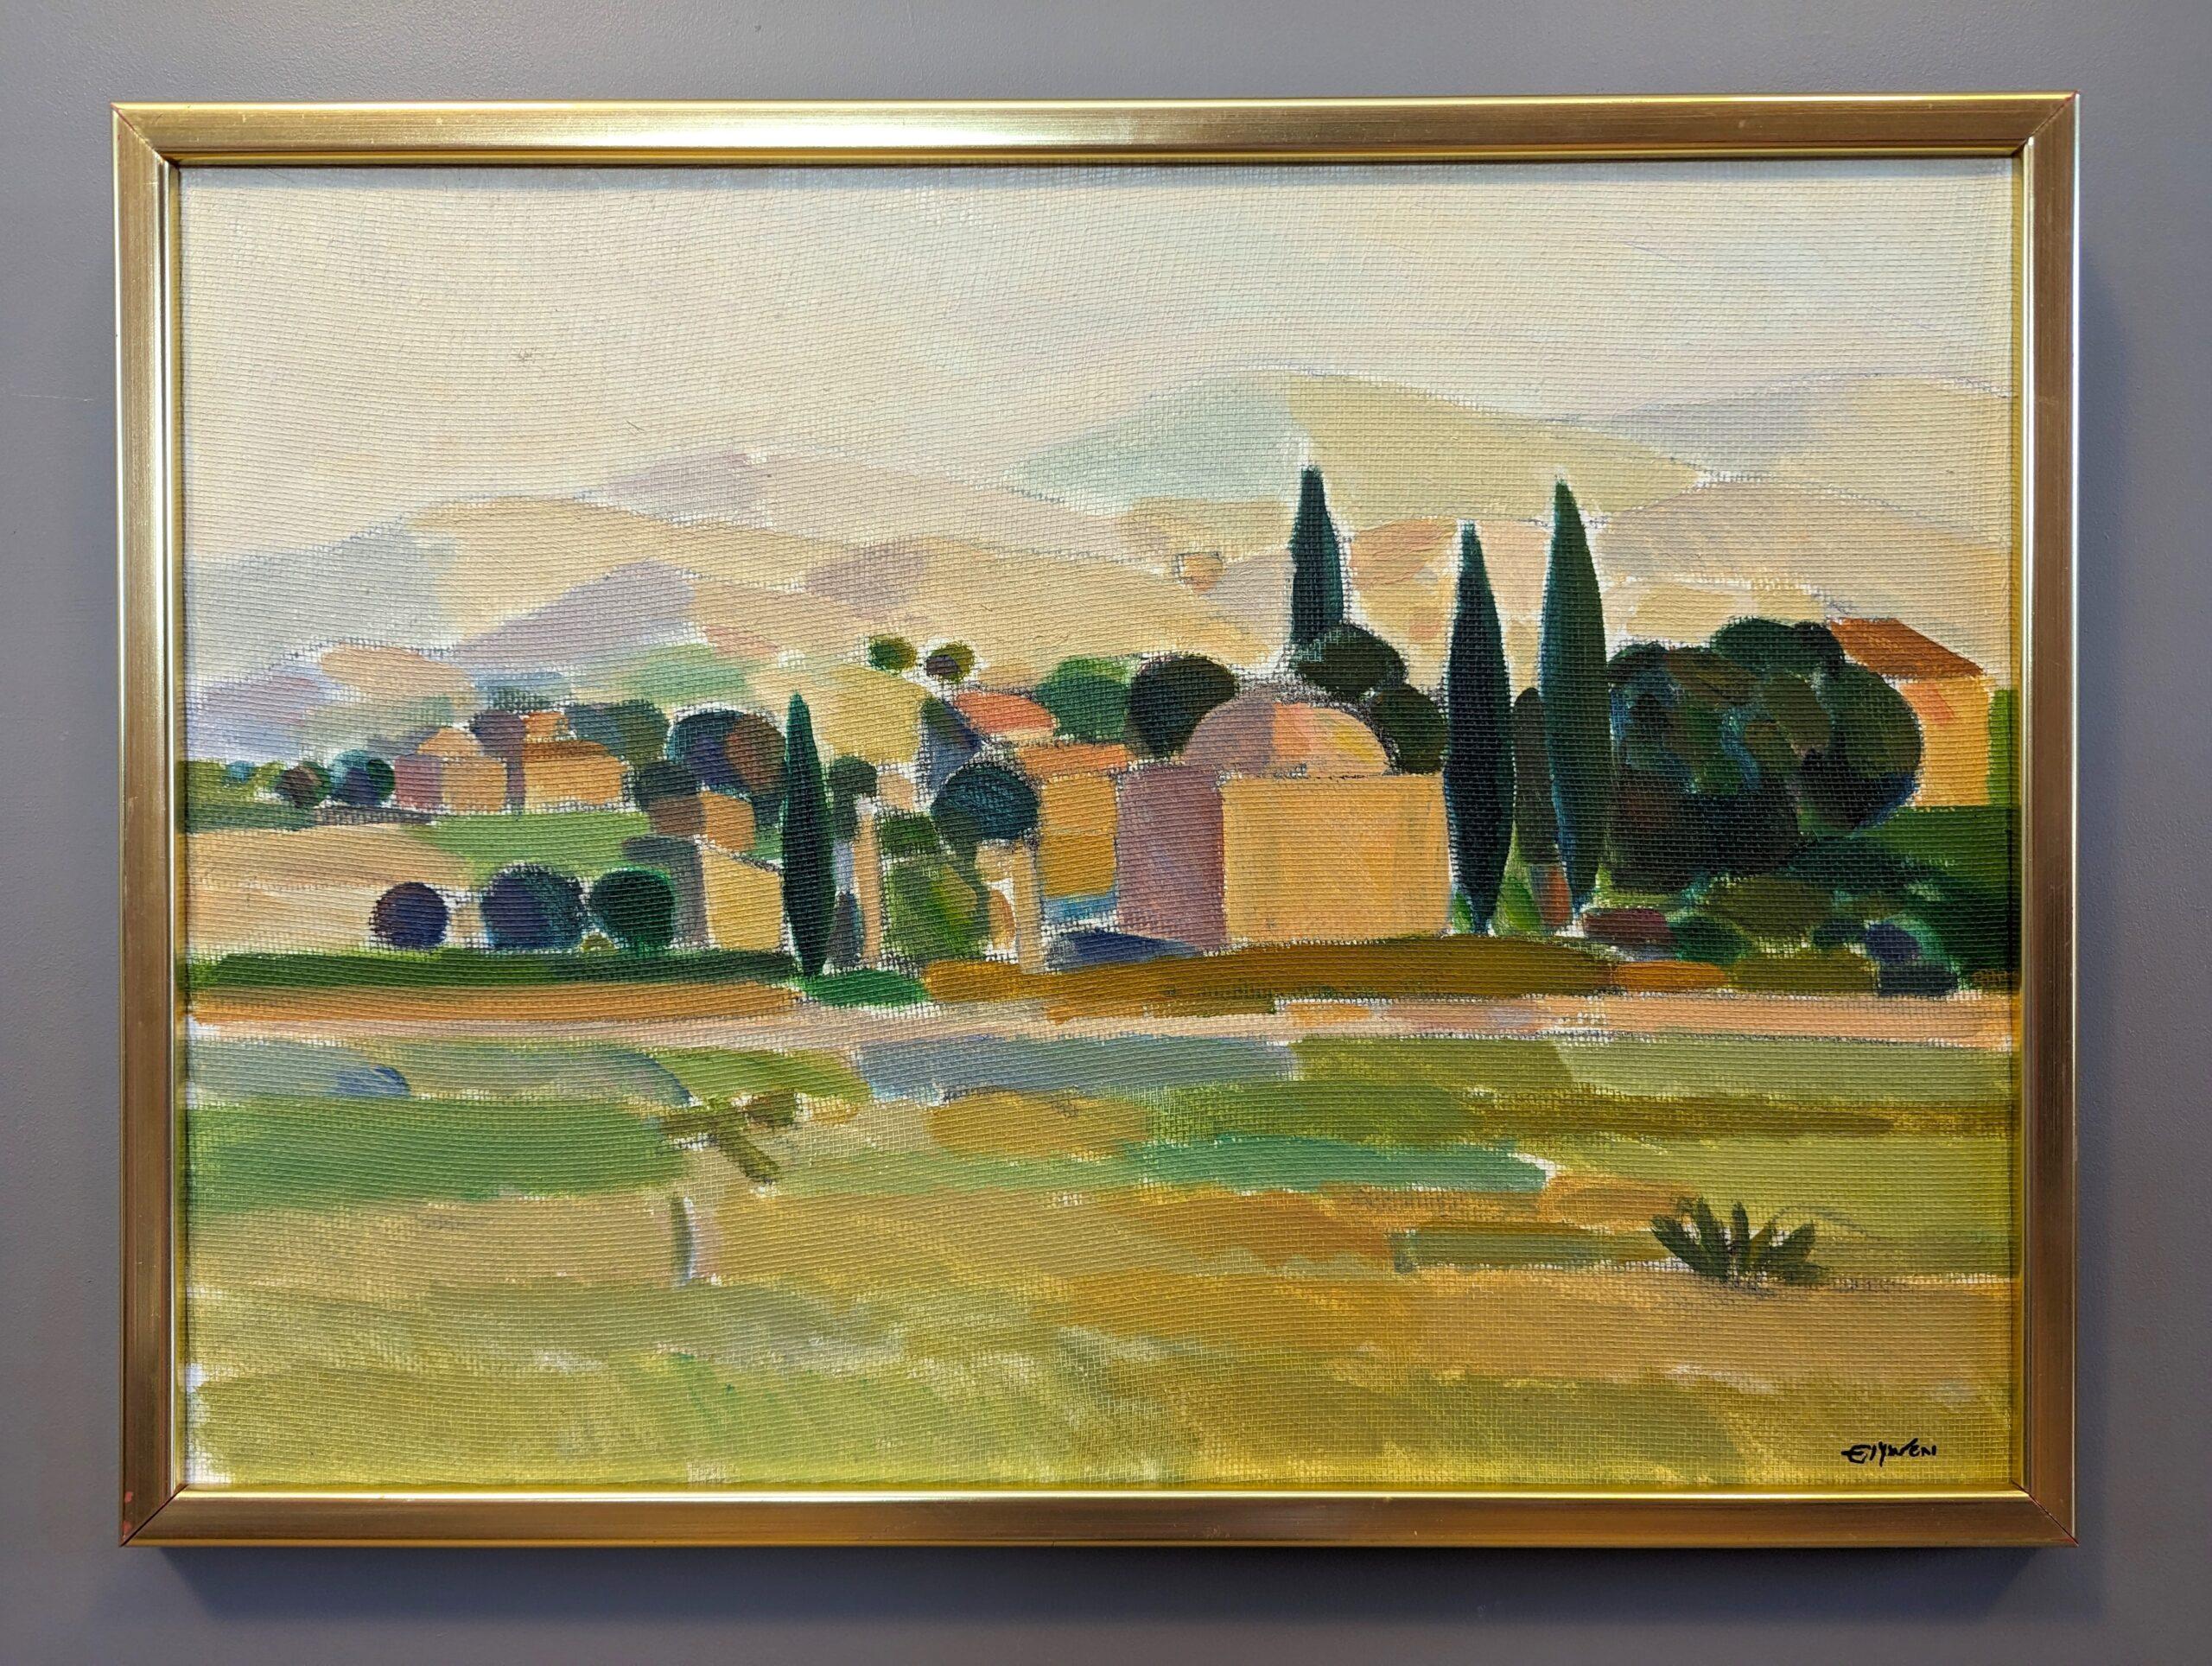 CHARMING VIEWS
Oil on Board
Size: 40 x 53 cm (including frame)

A charming and picturesque mid-century landscape composition, executed in oil onto board by the established Swedish artist Eric Elfvén (1921–2008), whose works have been exhibited in